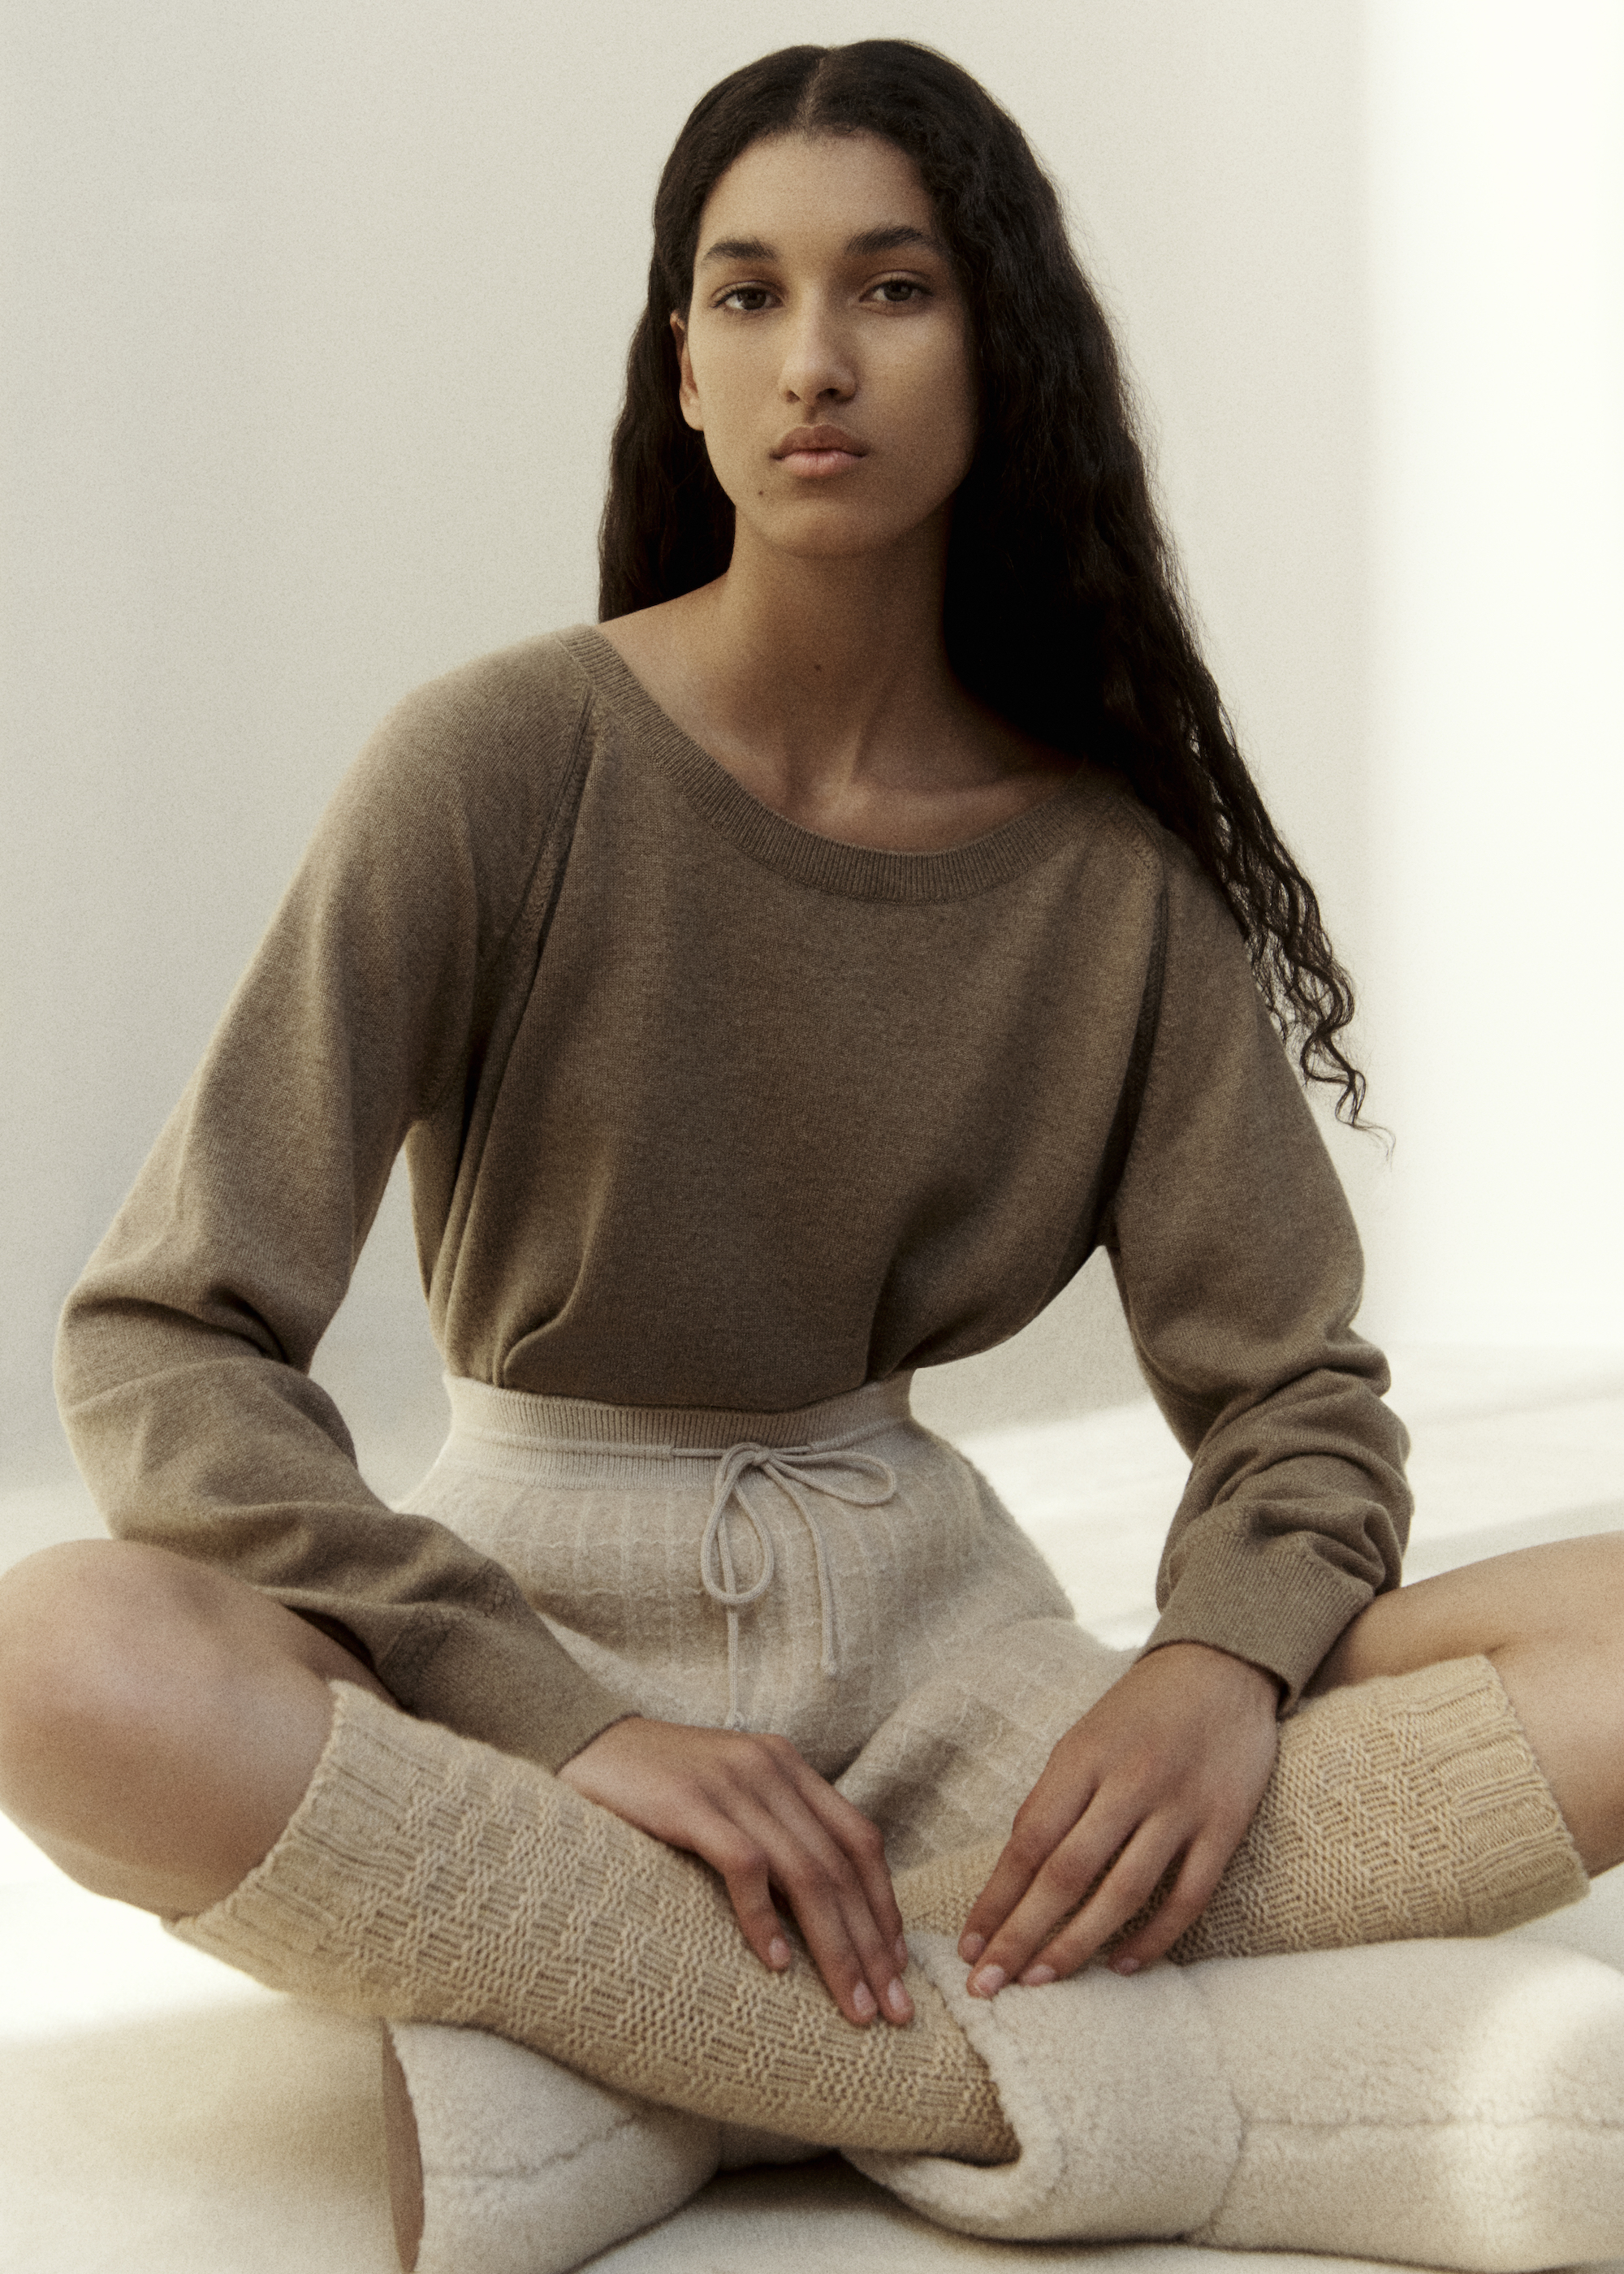 Loro Piana's New Cocooning Collection Focuses on Cashmere Leisurewear